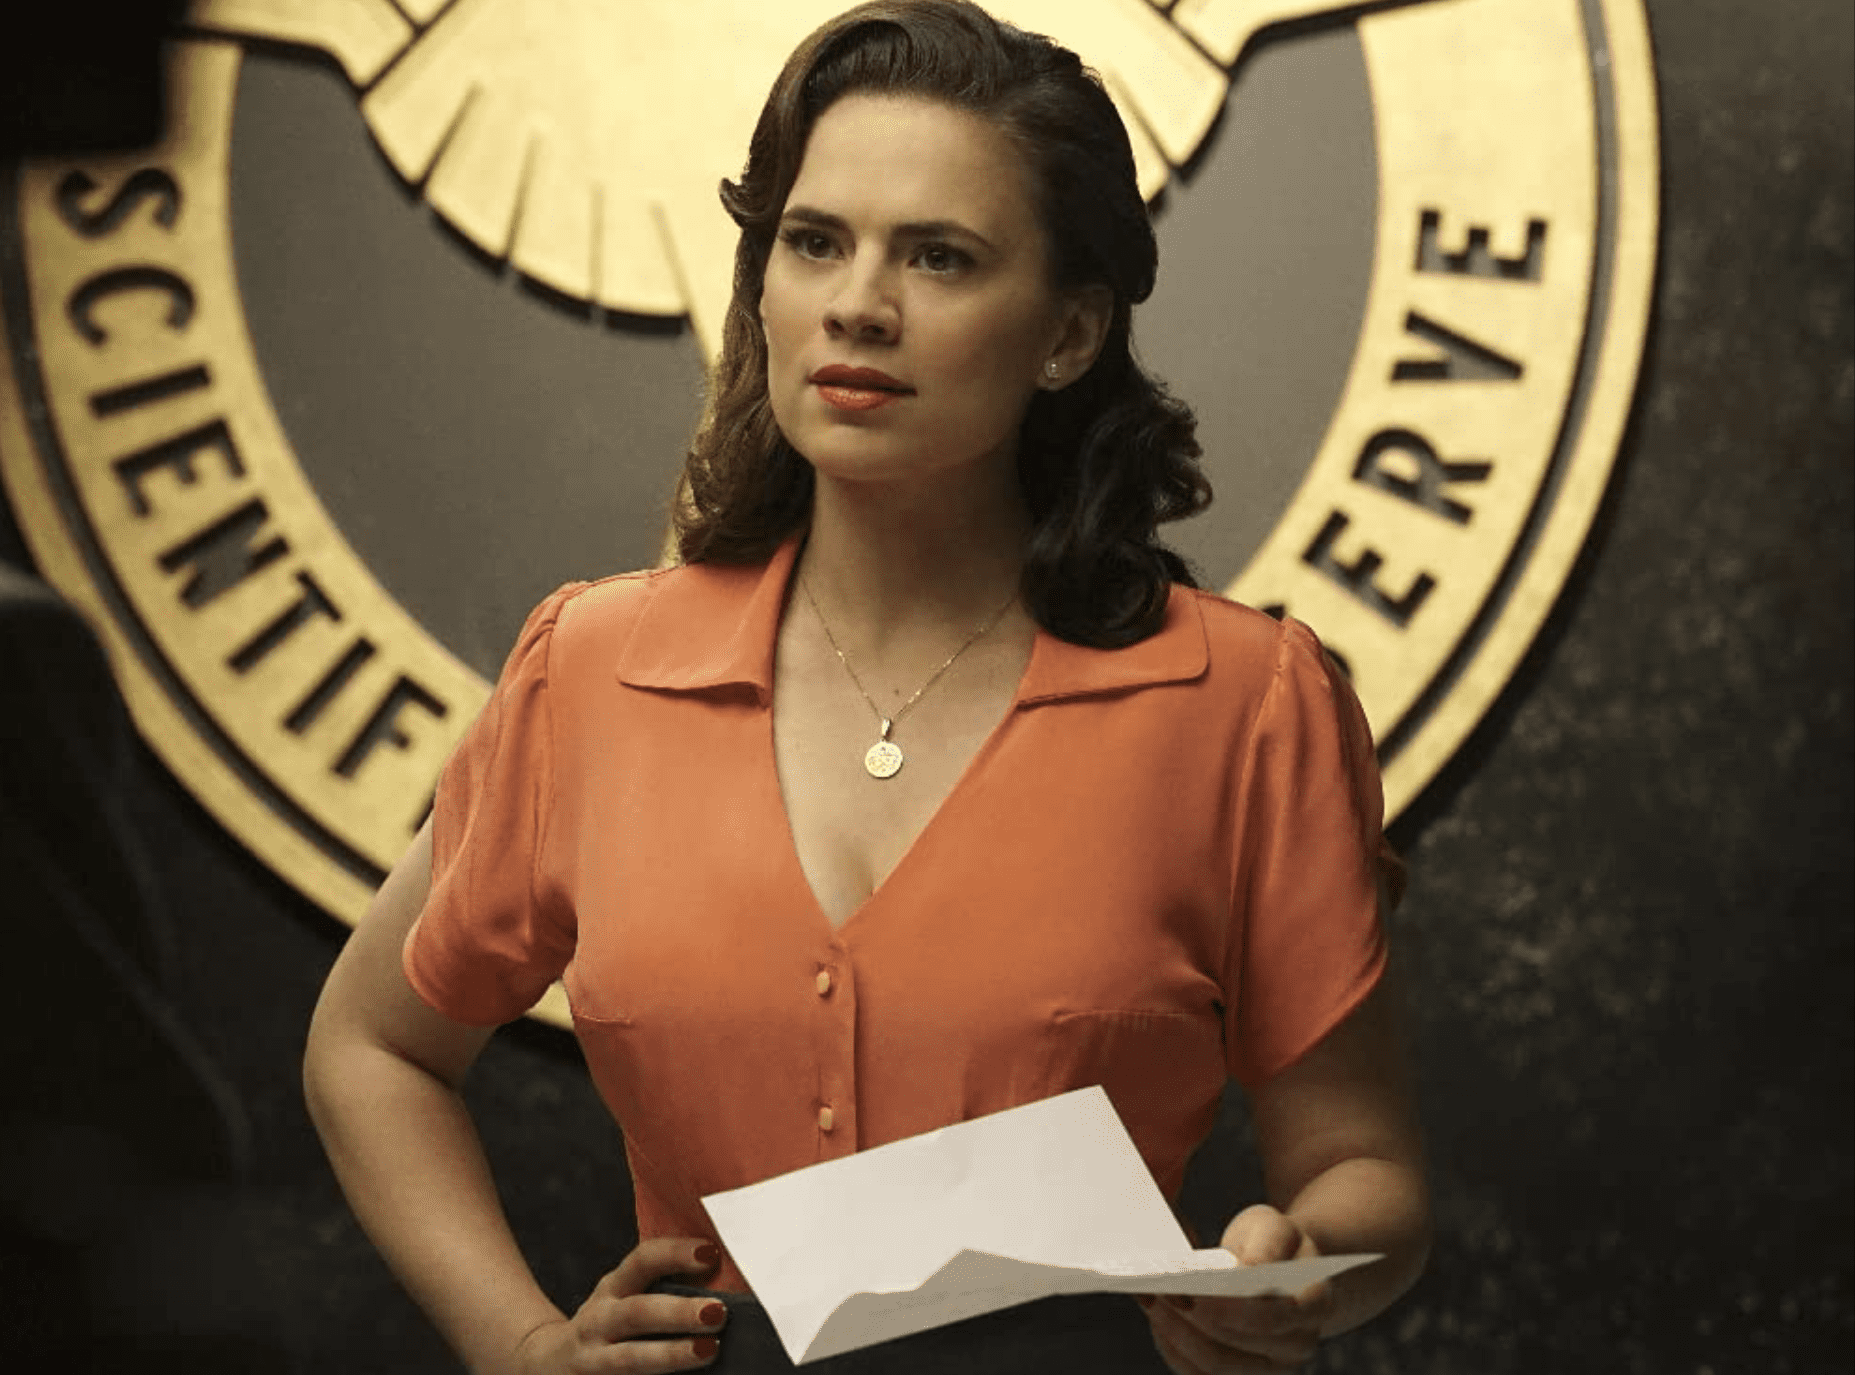 Agent Peggy Carter working a case